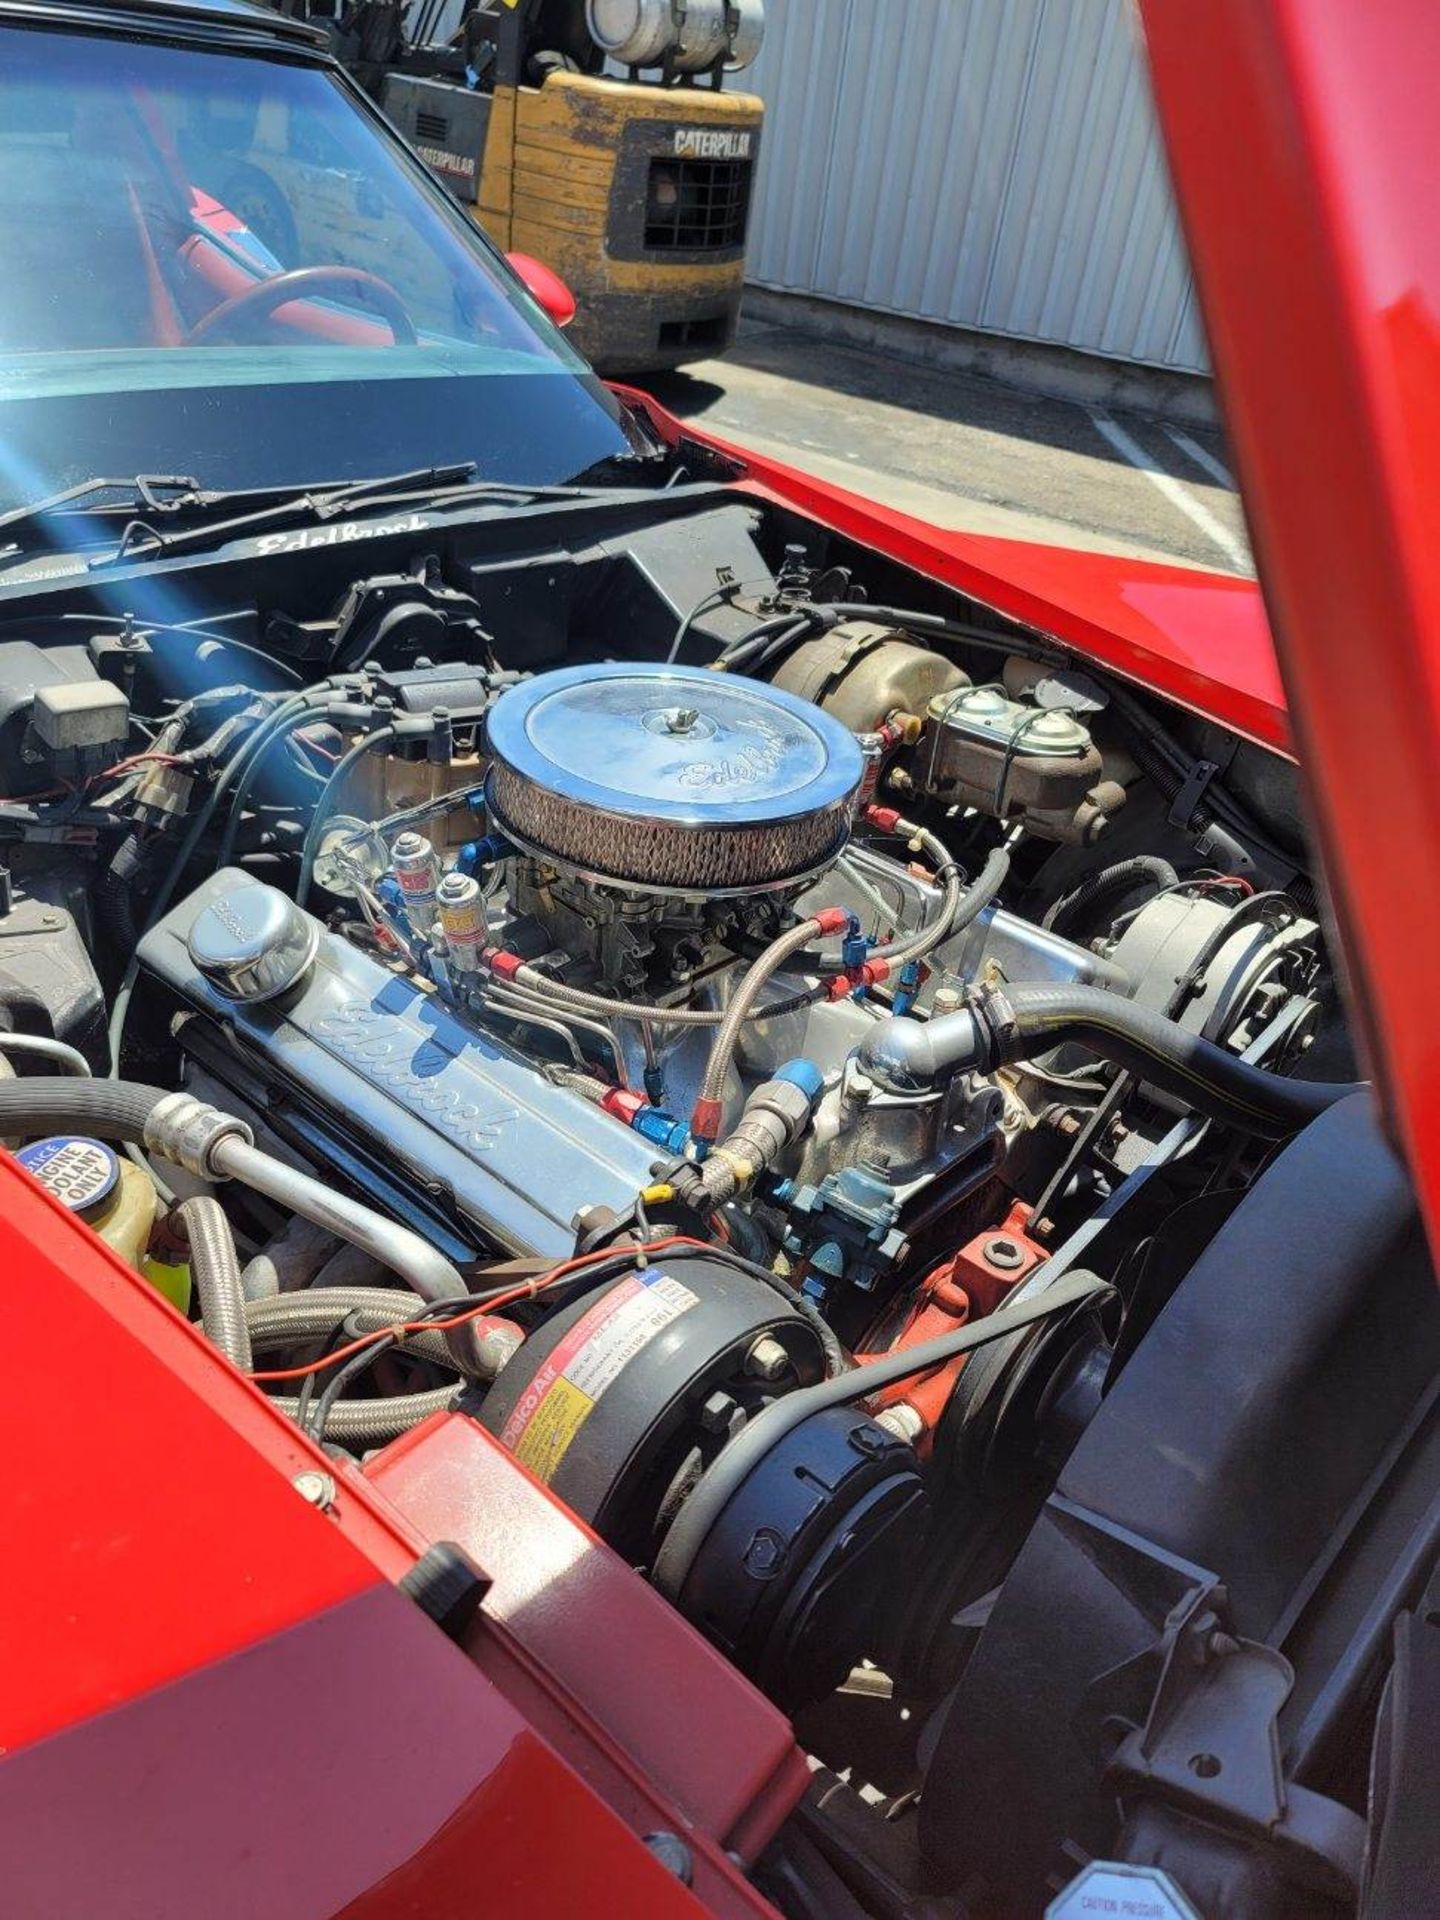 1980 CHEVROLET CORVETTE, WAS VIC EDELBROCK'S PERSONAL CAR BOUGHT FOR R&D, RED INTERIOR, TITLE ONLY. - Image 65 of 70